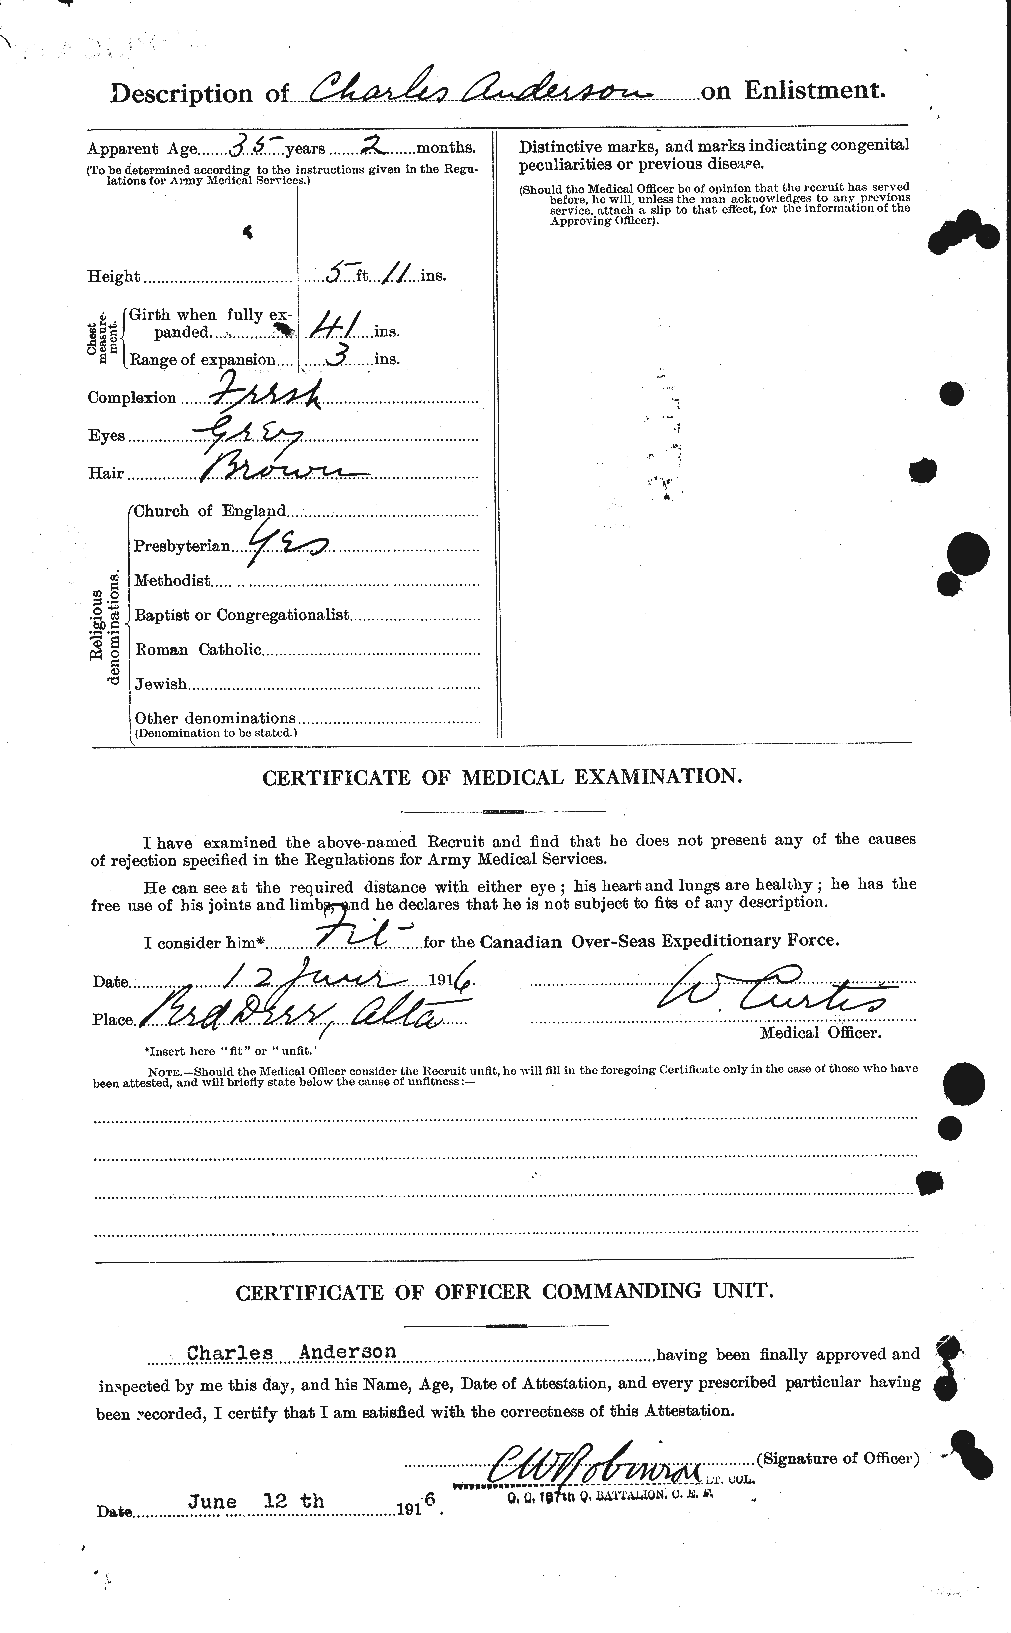 Personnel Records of the First World War - CEF 209262b